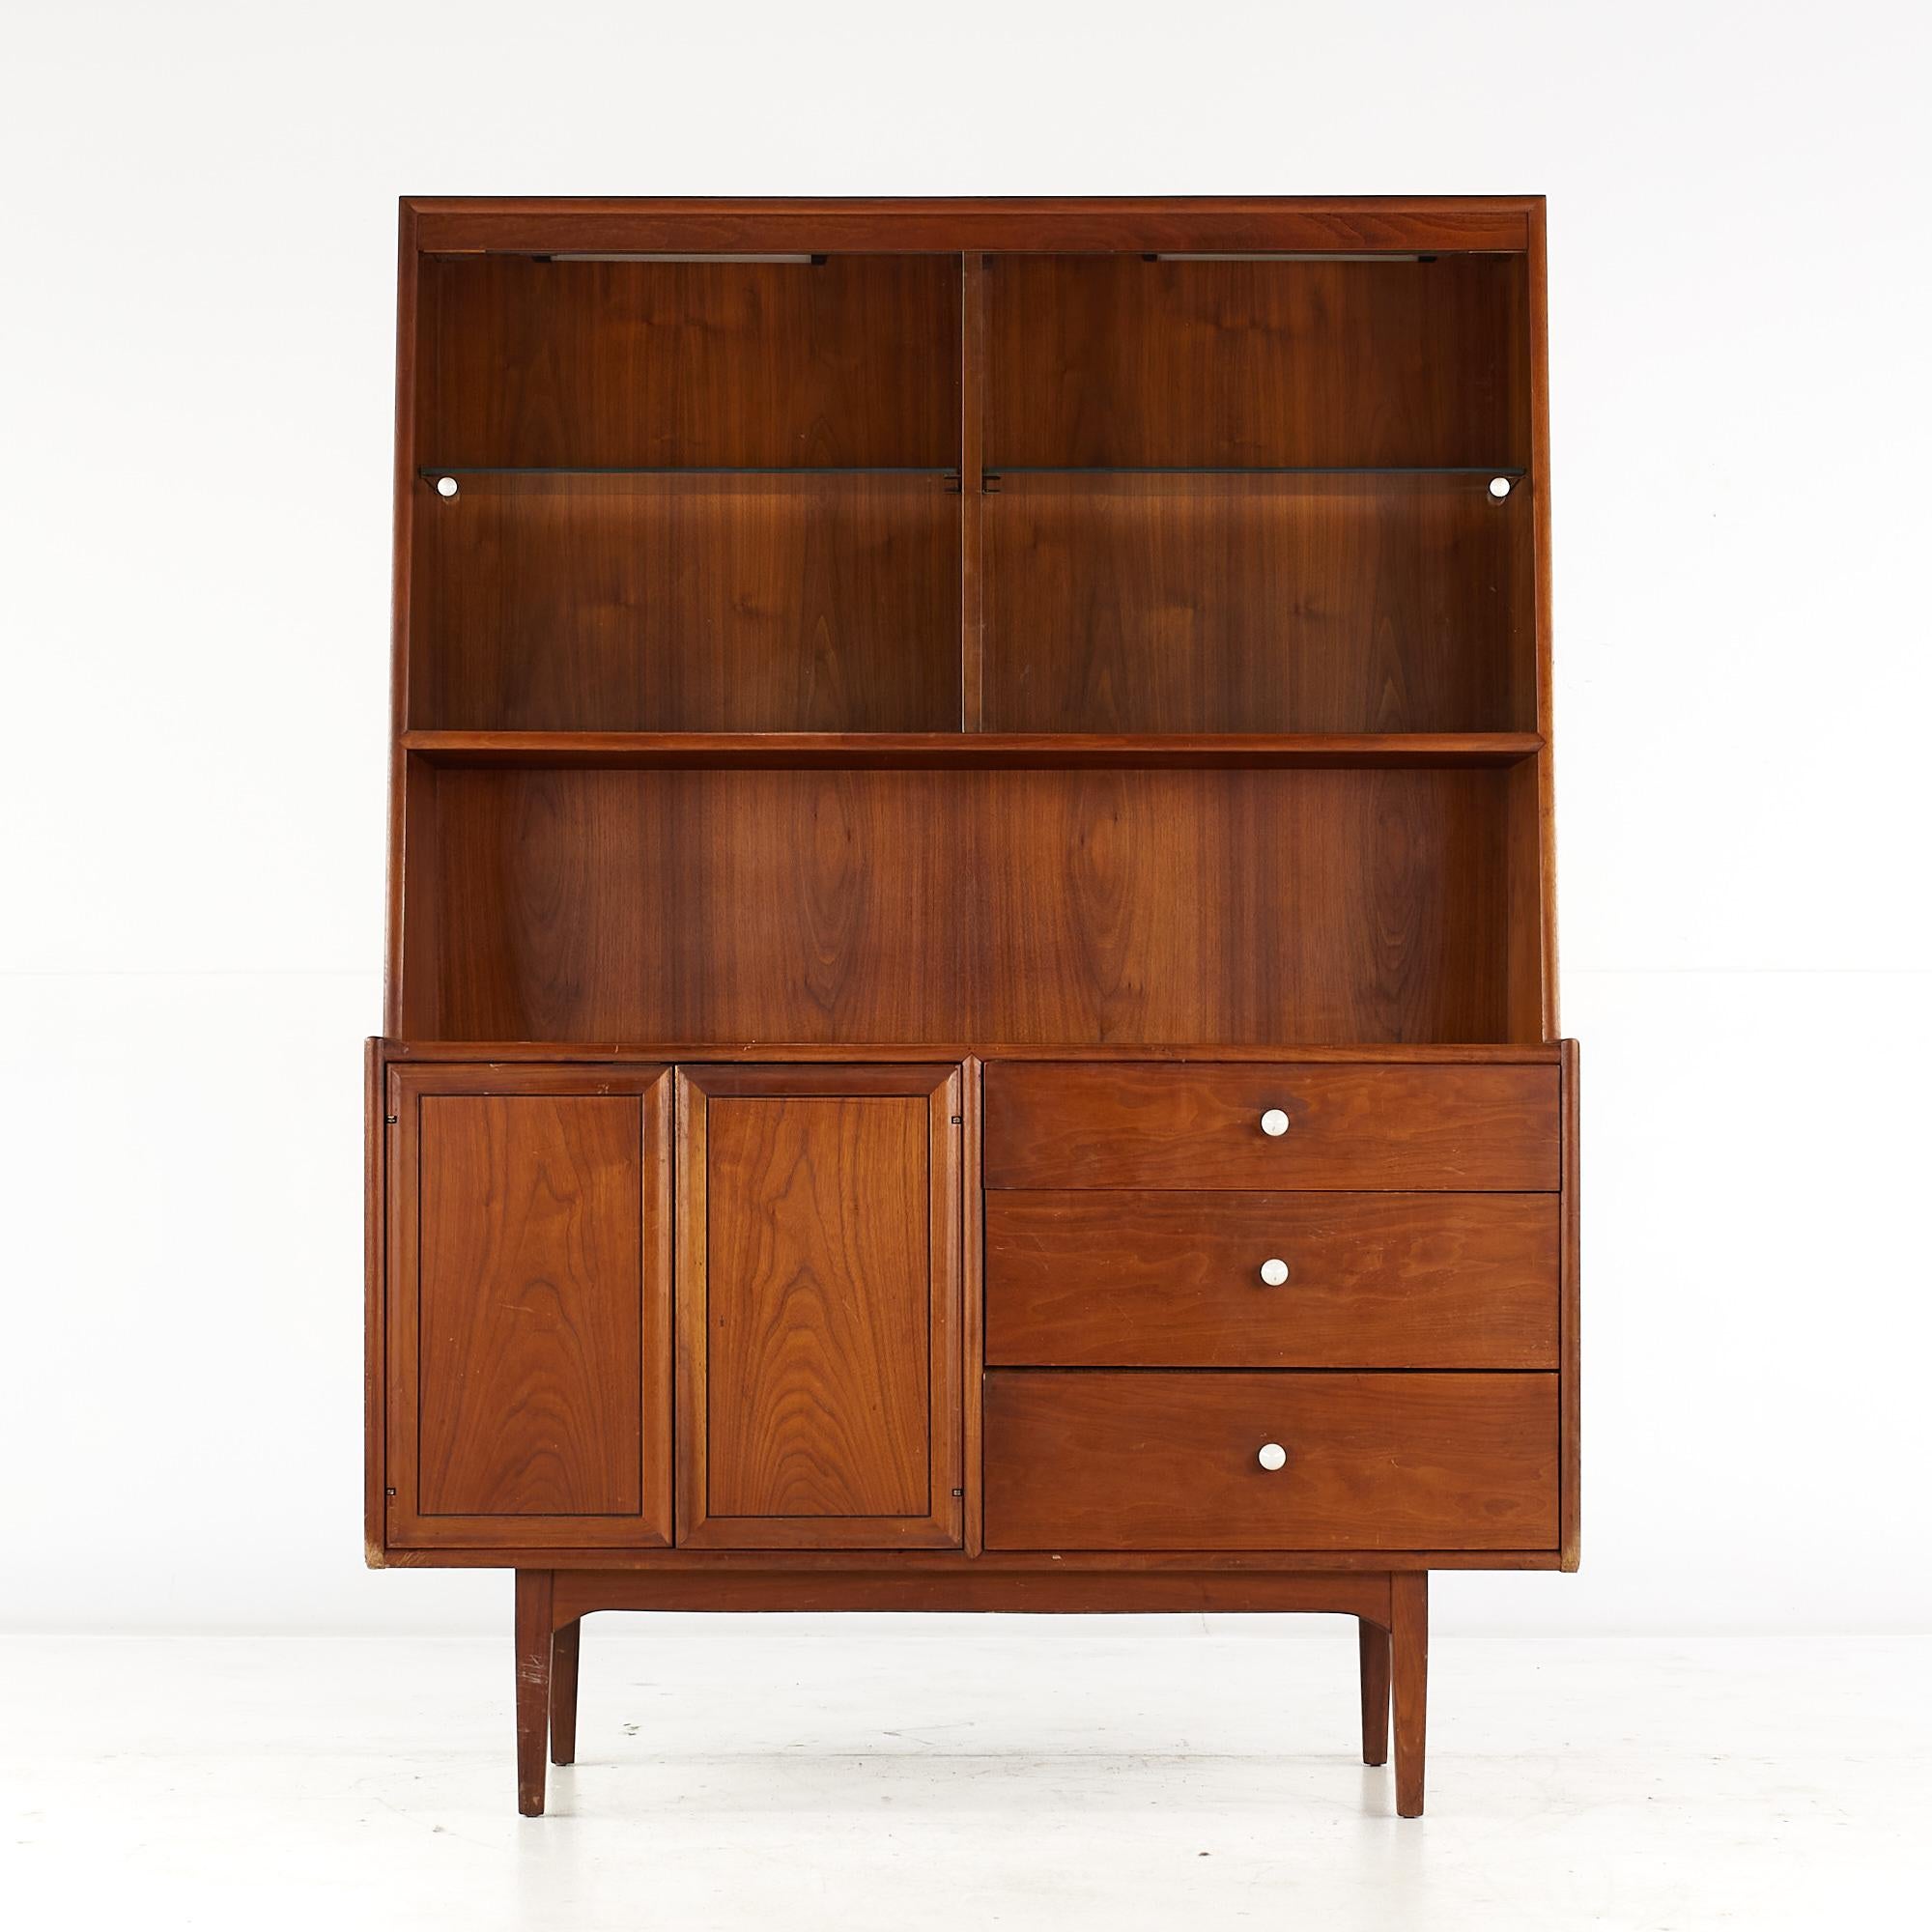 Kipp Stewart for Drexel Declaration Mid Century Walnut Buffet and Hutch

This buffet and hutch measures: 48.5 wide x 20 deep x 67 inches high

All pieces of furniture can be had in what we call restored vintage condition. That means the piece is